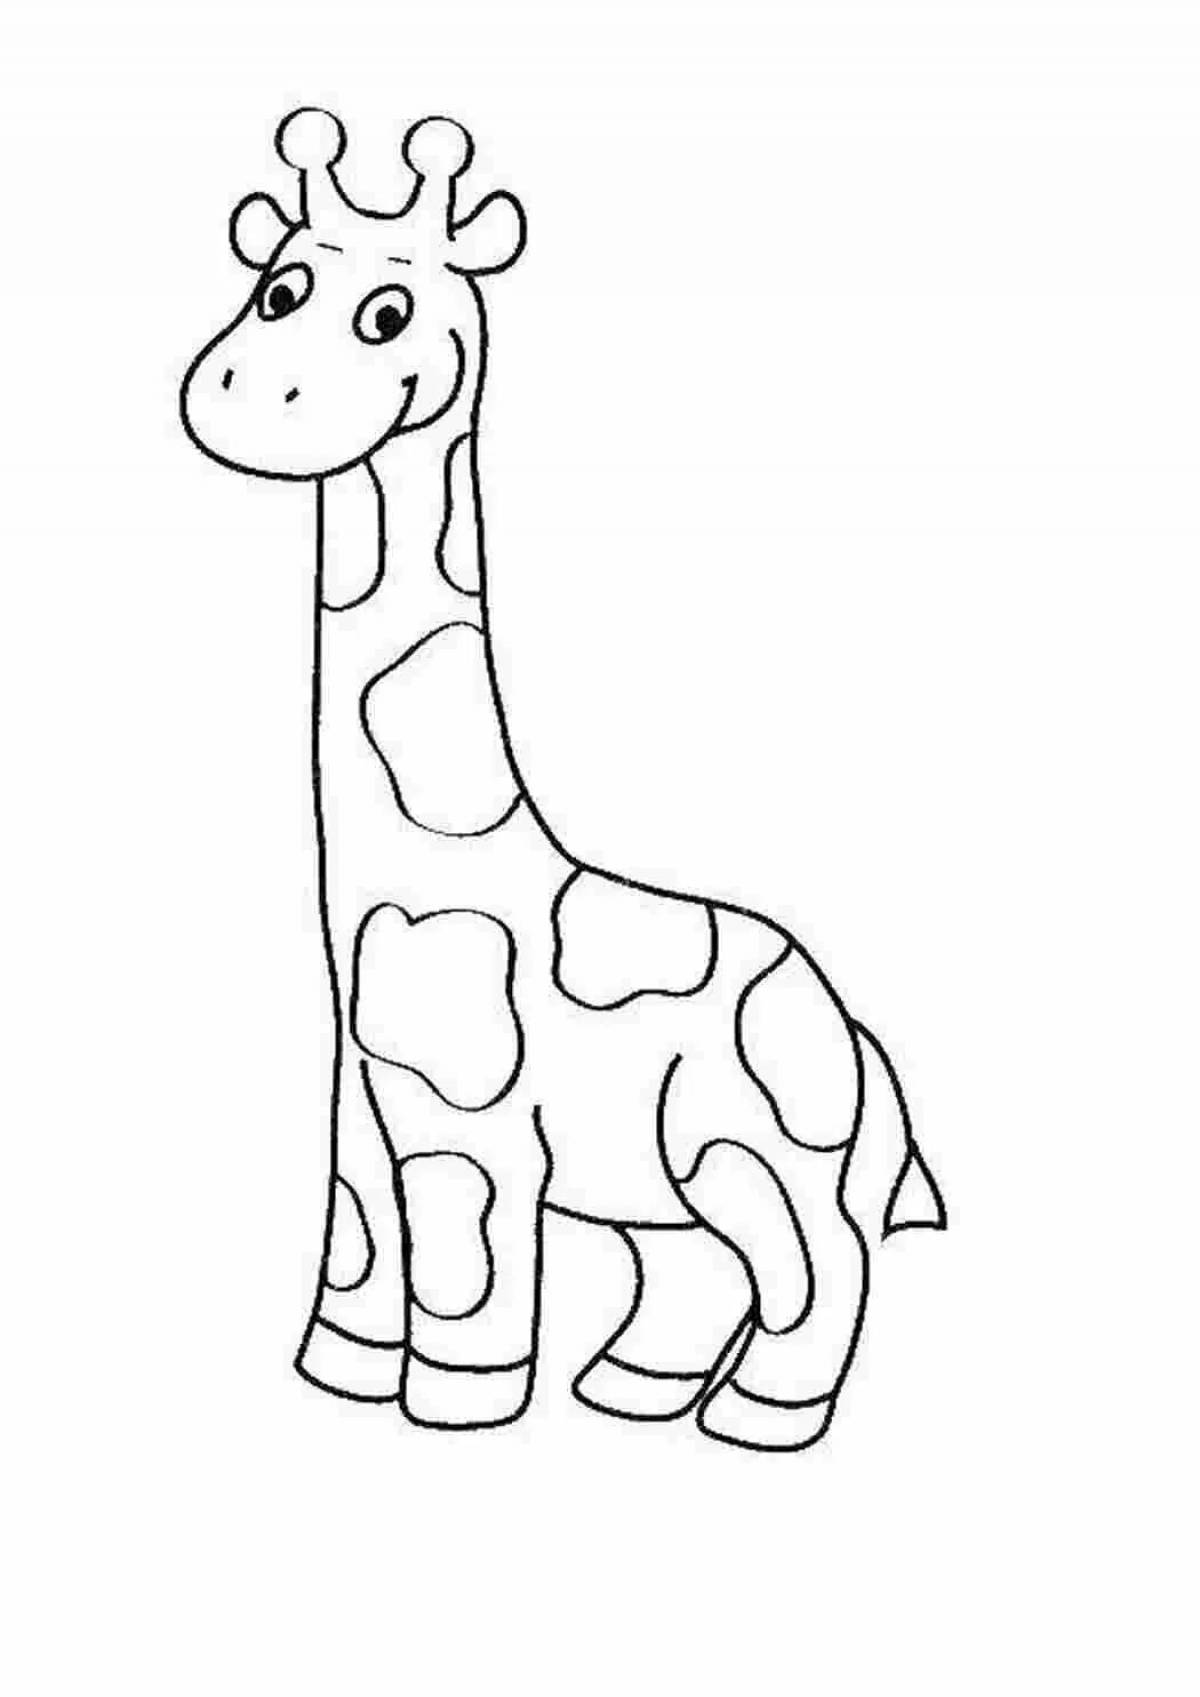 Awesome giraffe drawing for kids